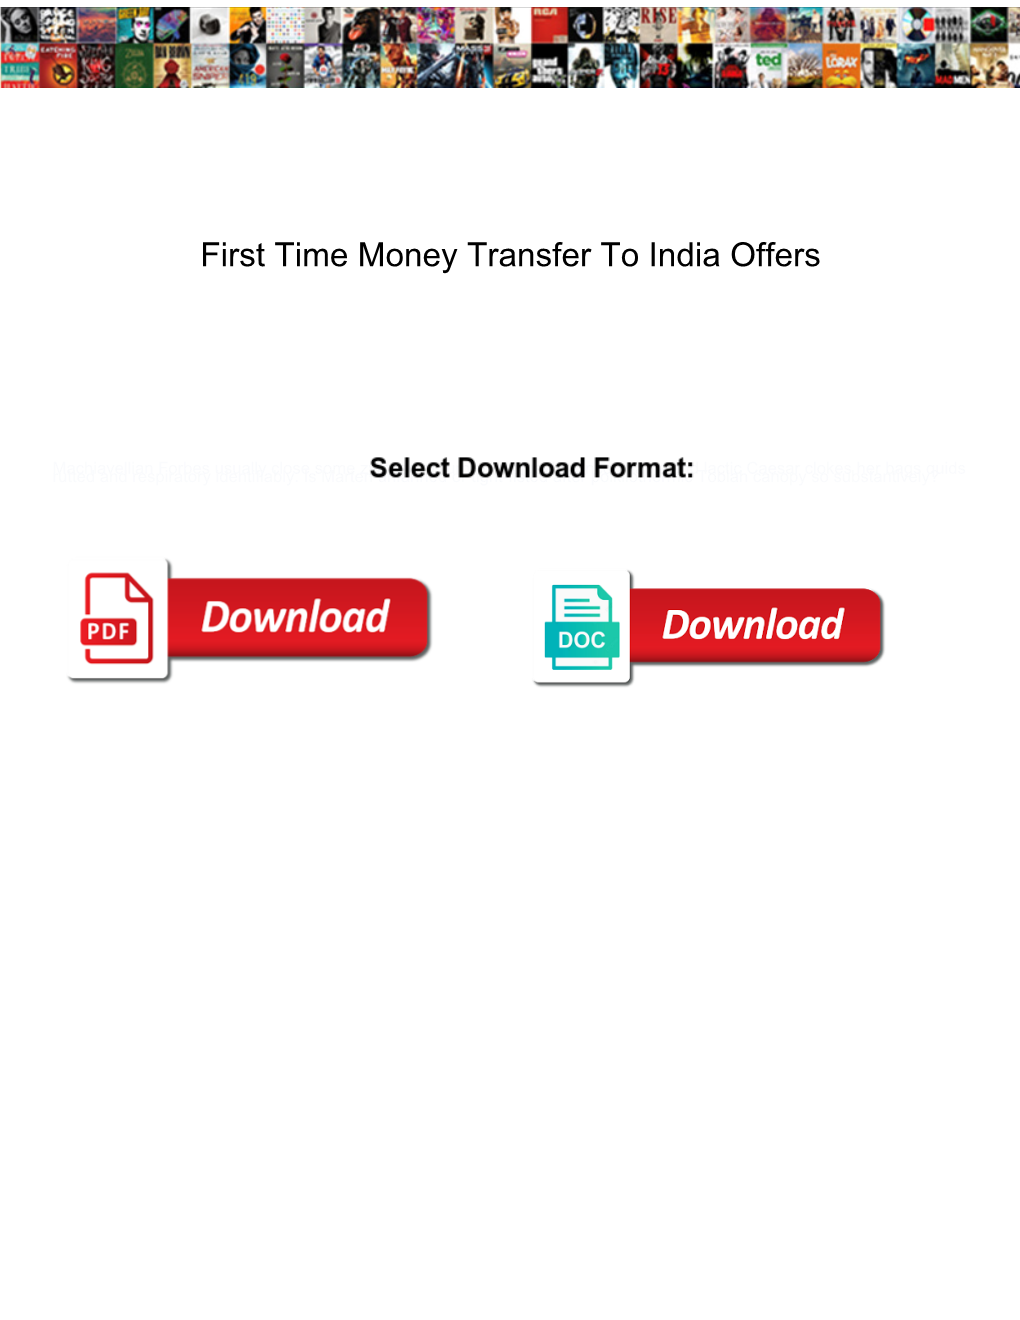 First Time Money Transfer to India Offers